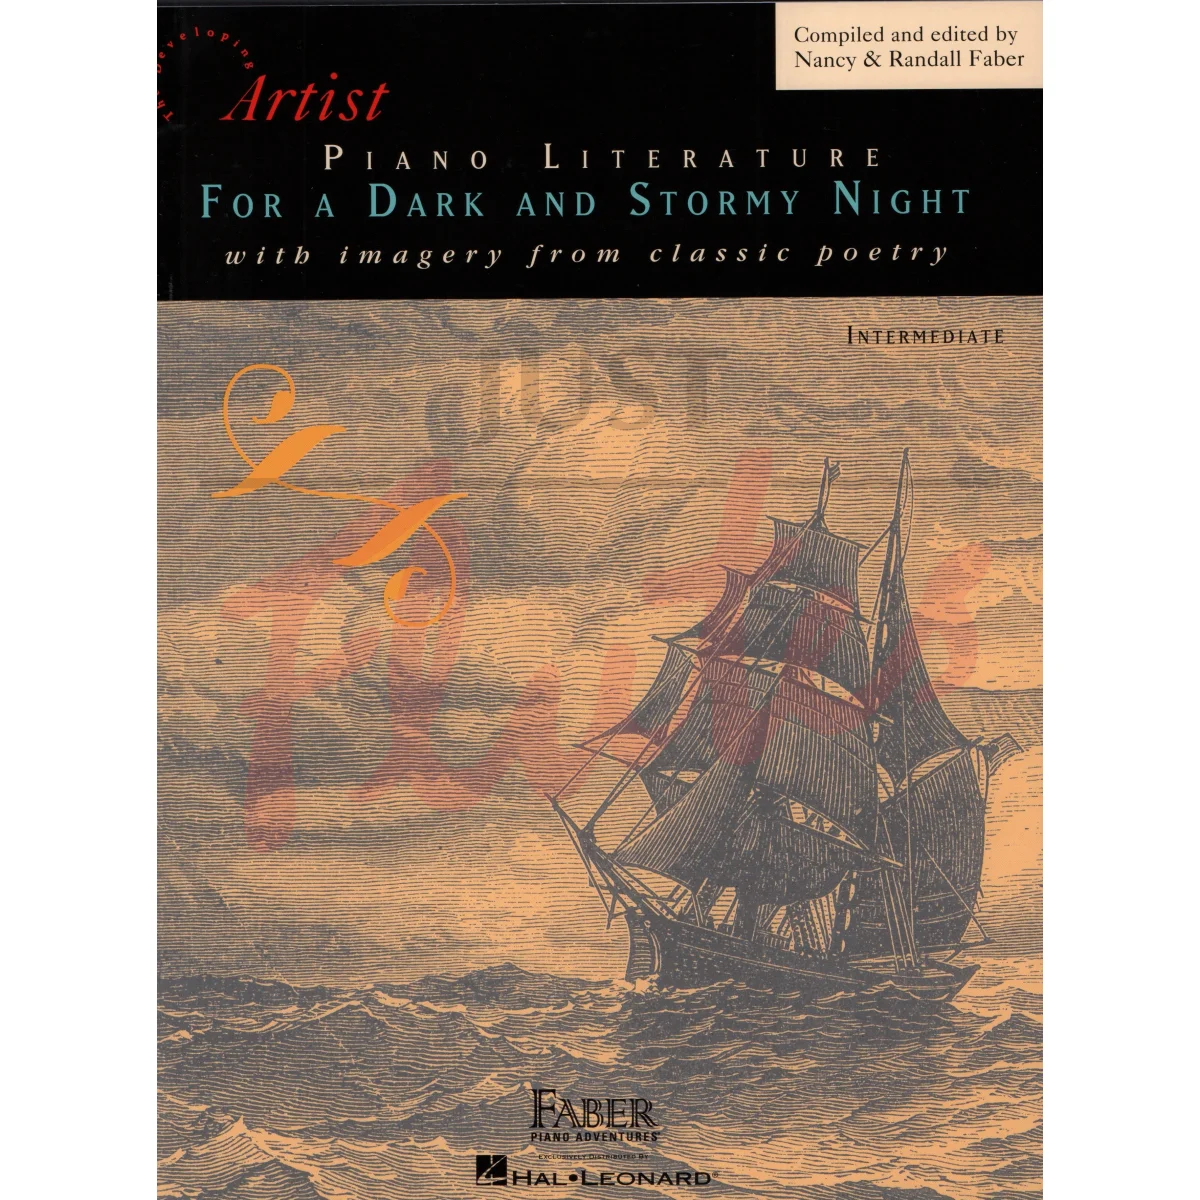 Piano Literature for a Dark and Stormy Night, Vol 1